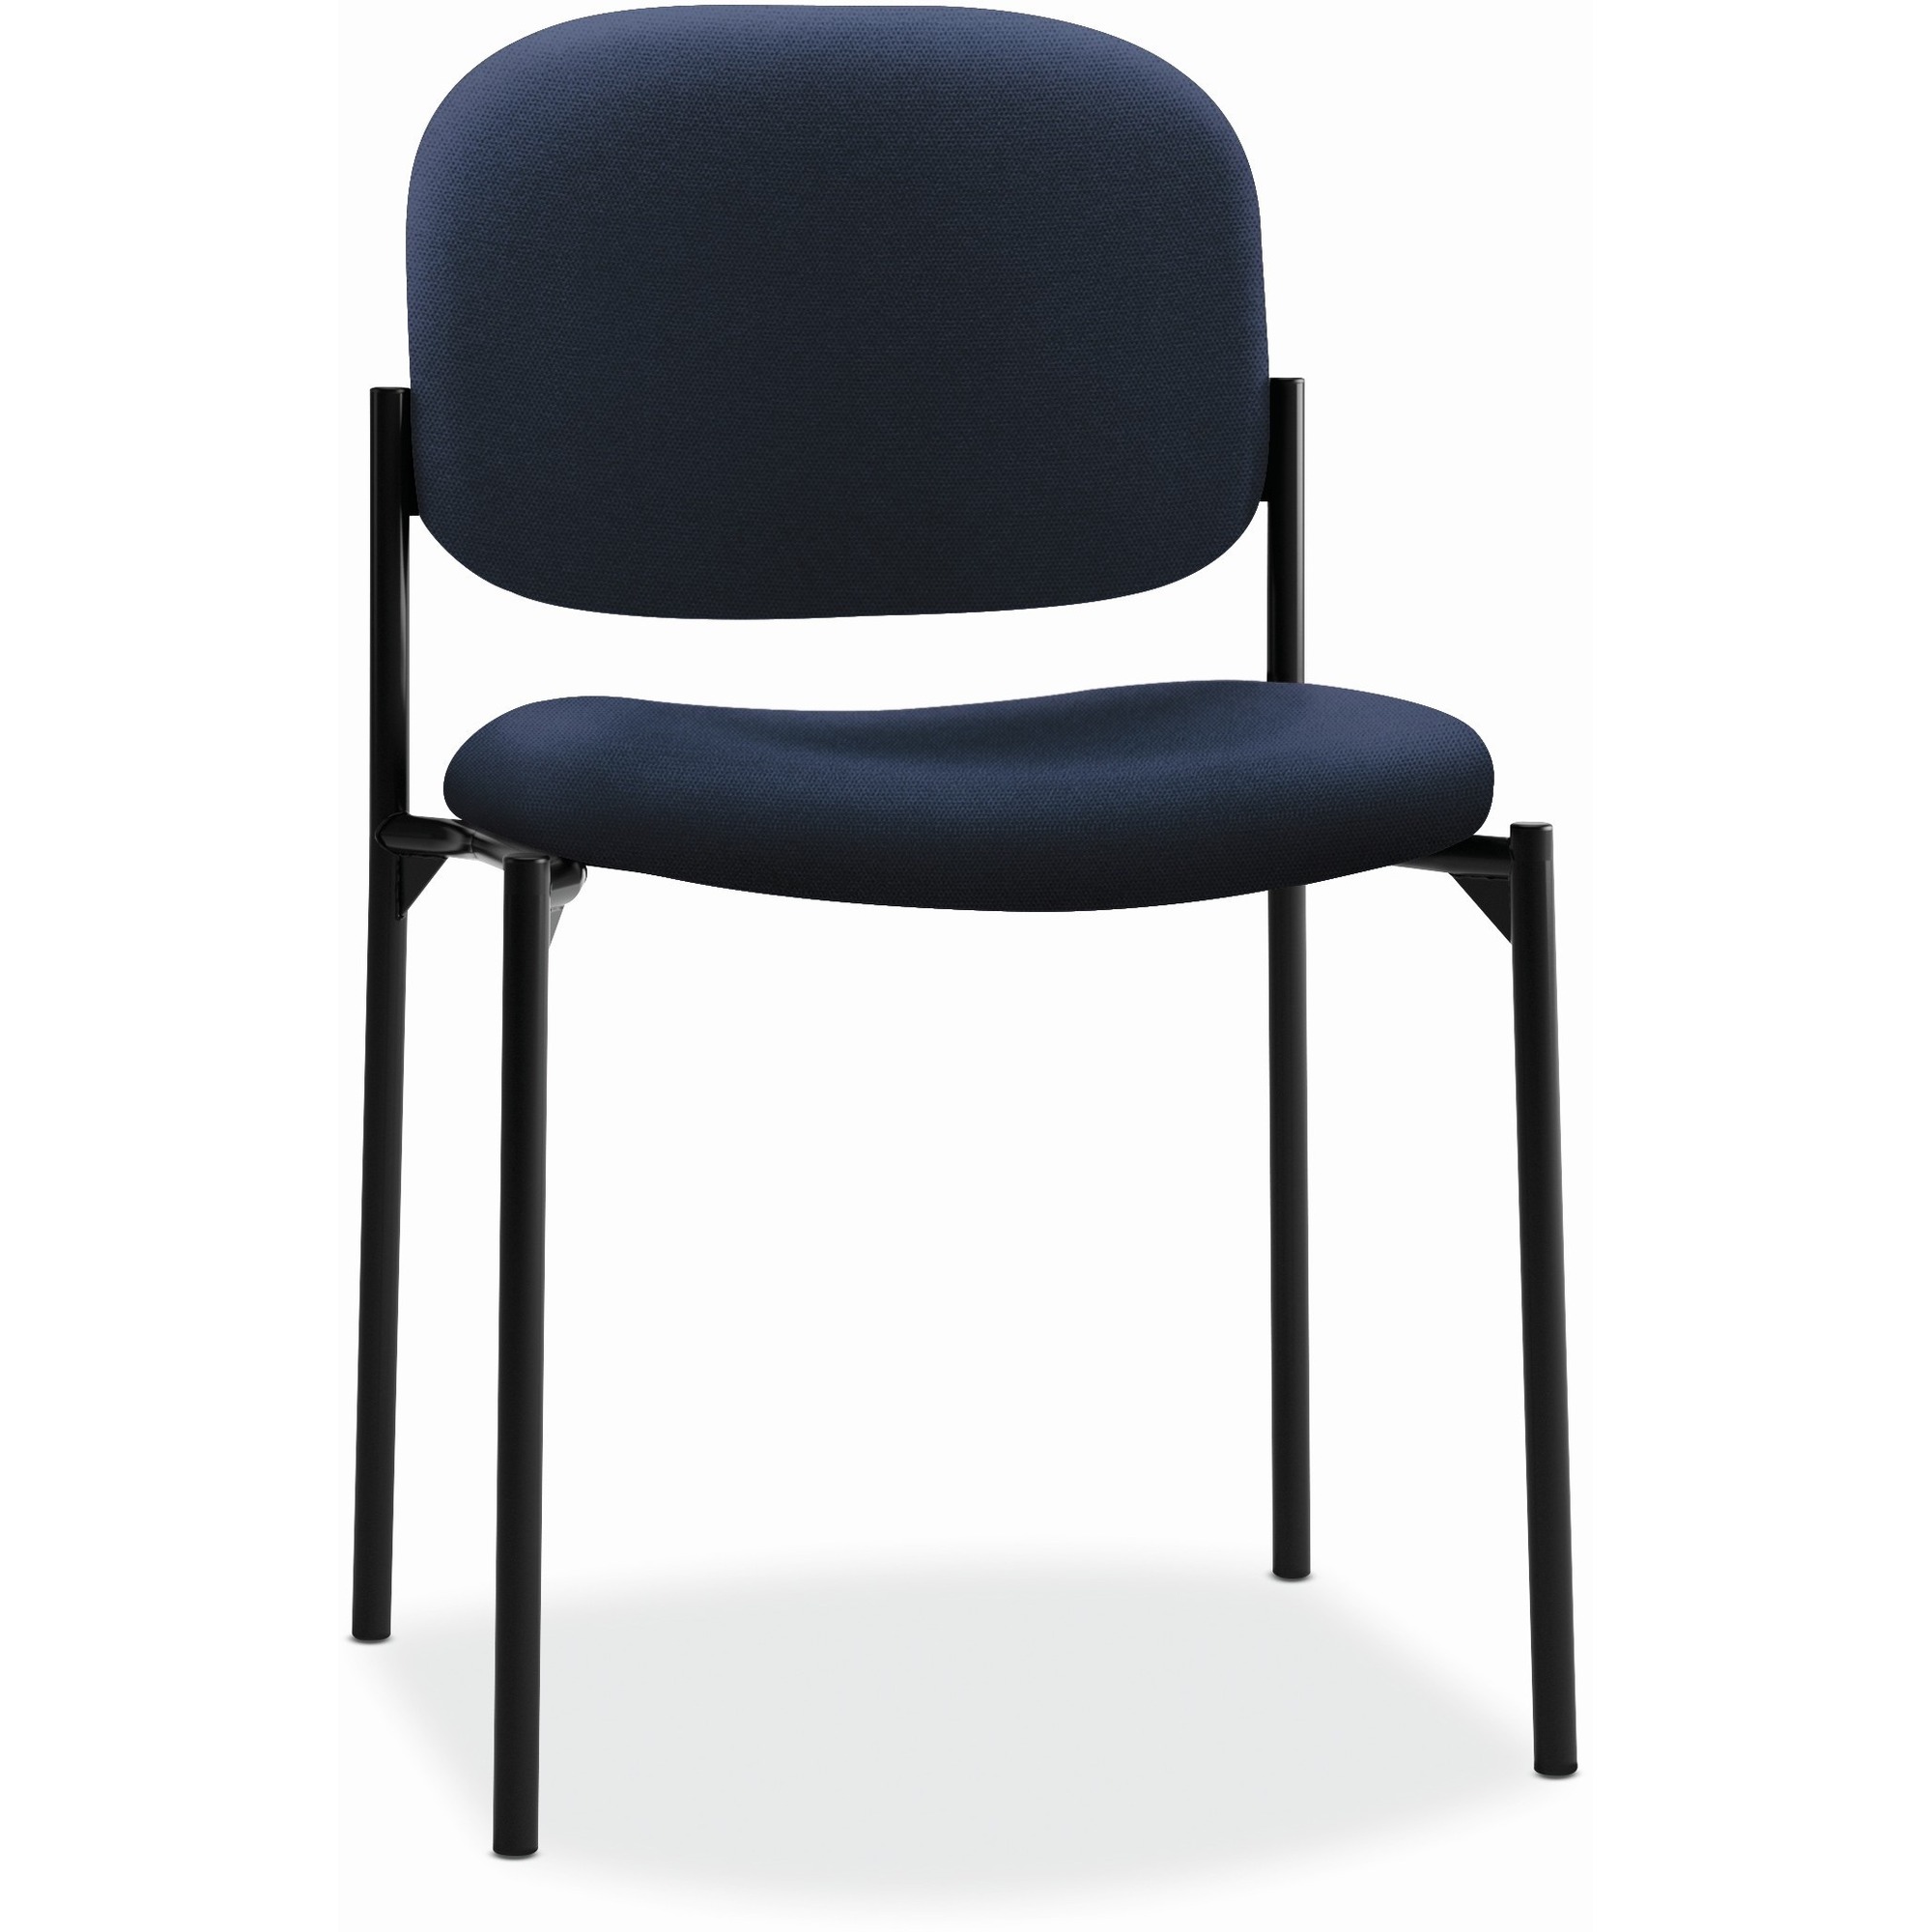 Basyx by HON Scatter Stacking Guest Chair - Navy Fabric, Polyester Seat -  Navy Fabric, Polyester Back - Black Tubular Steel Frame - Four-legged Base  - 